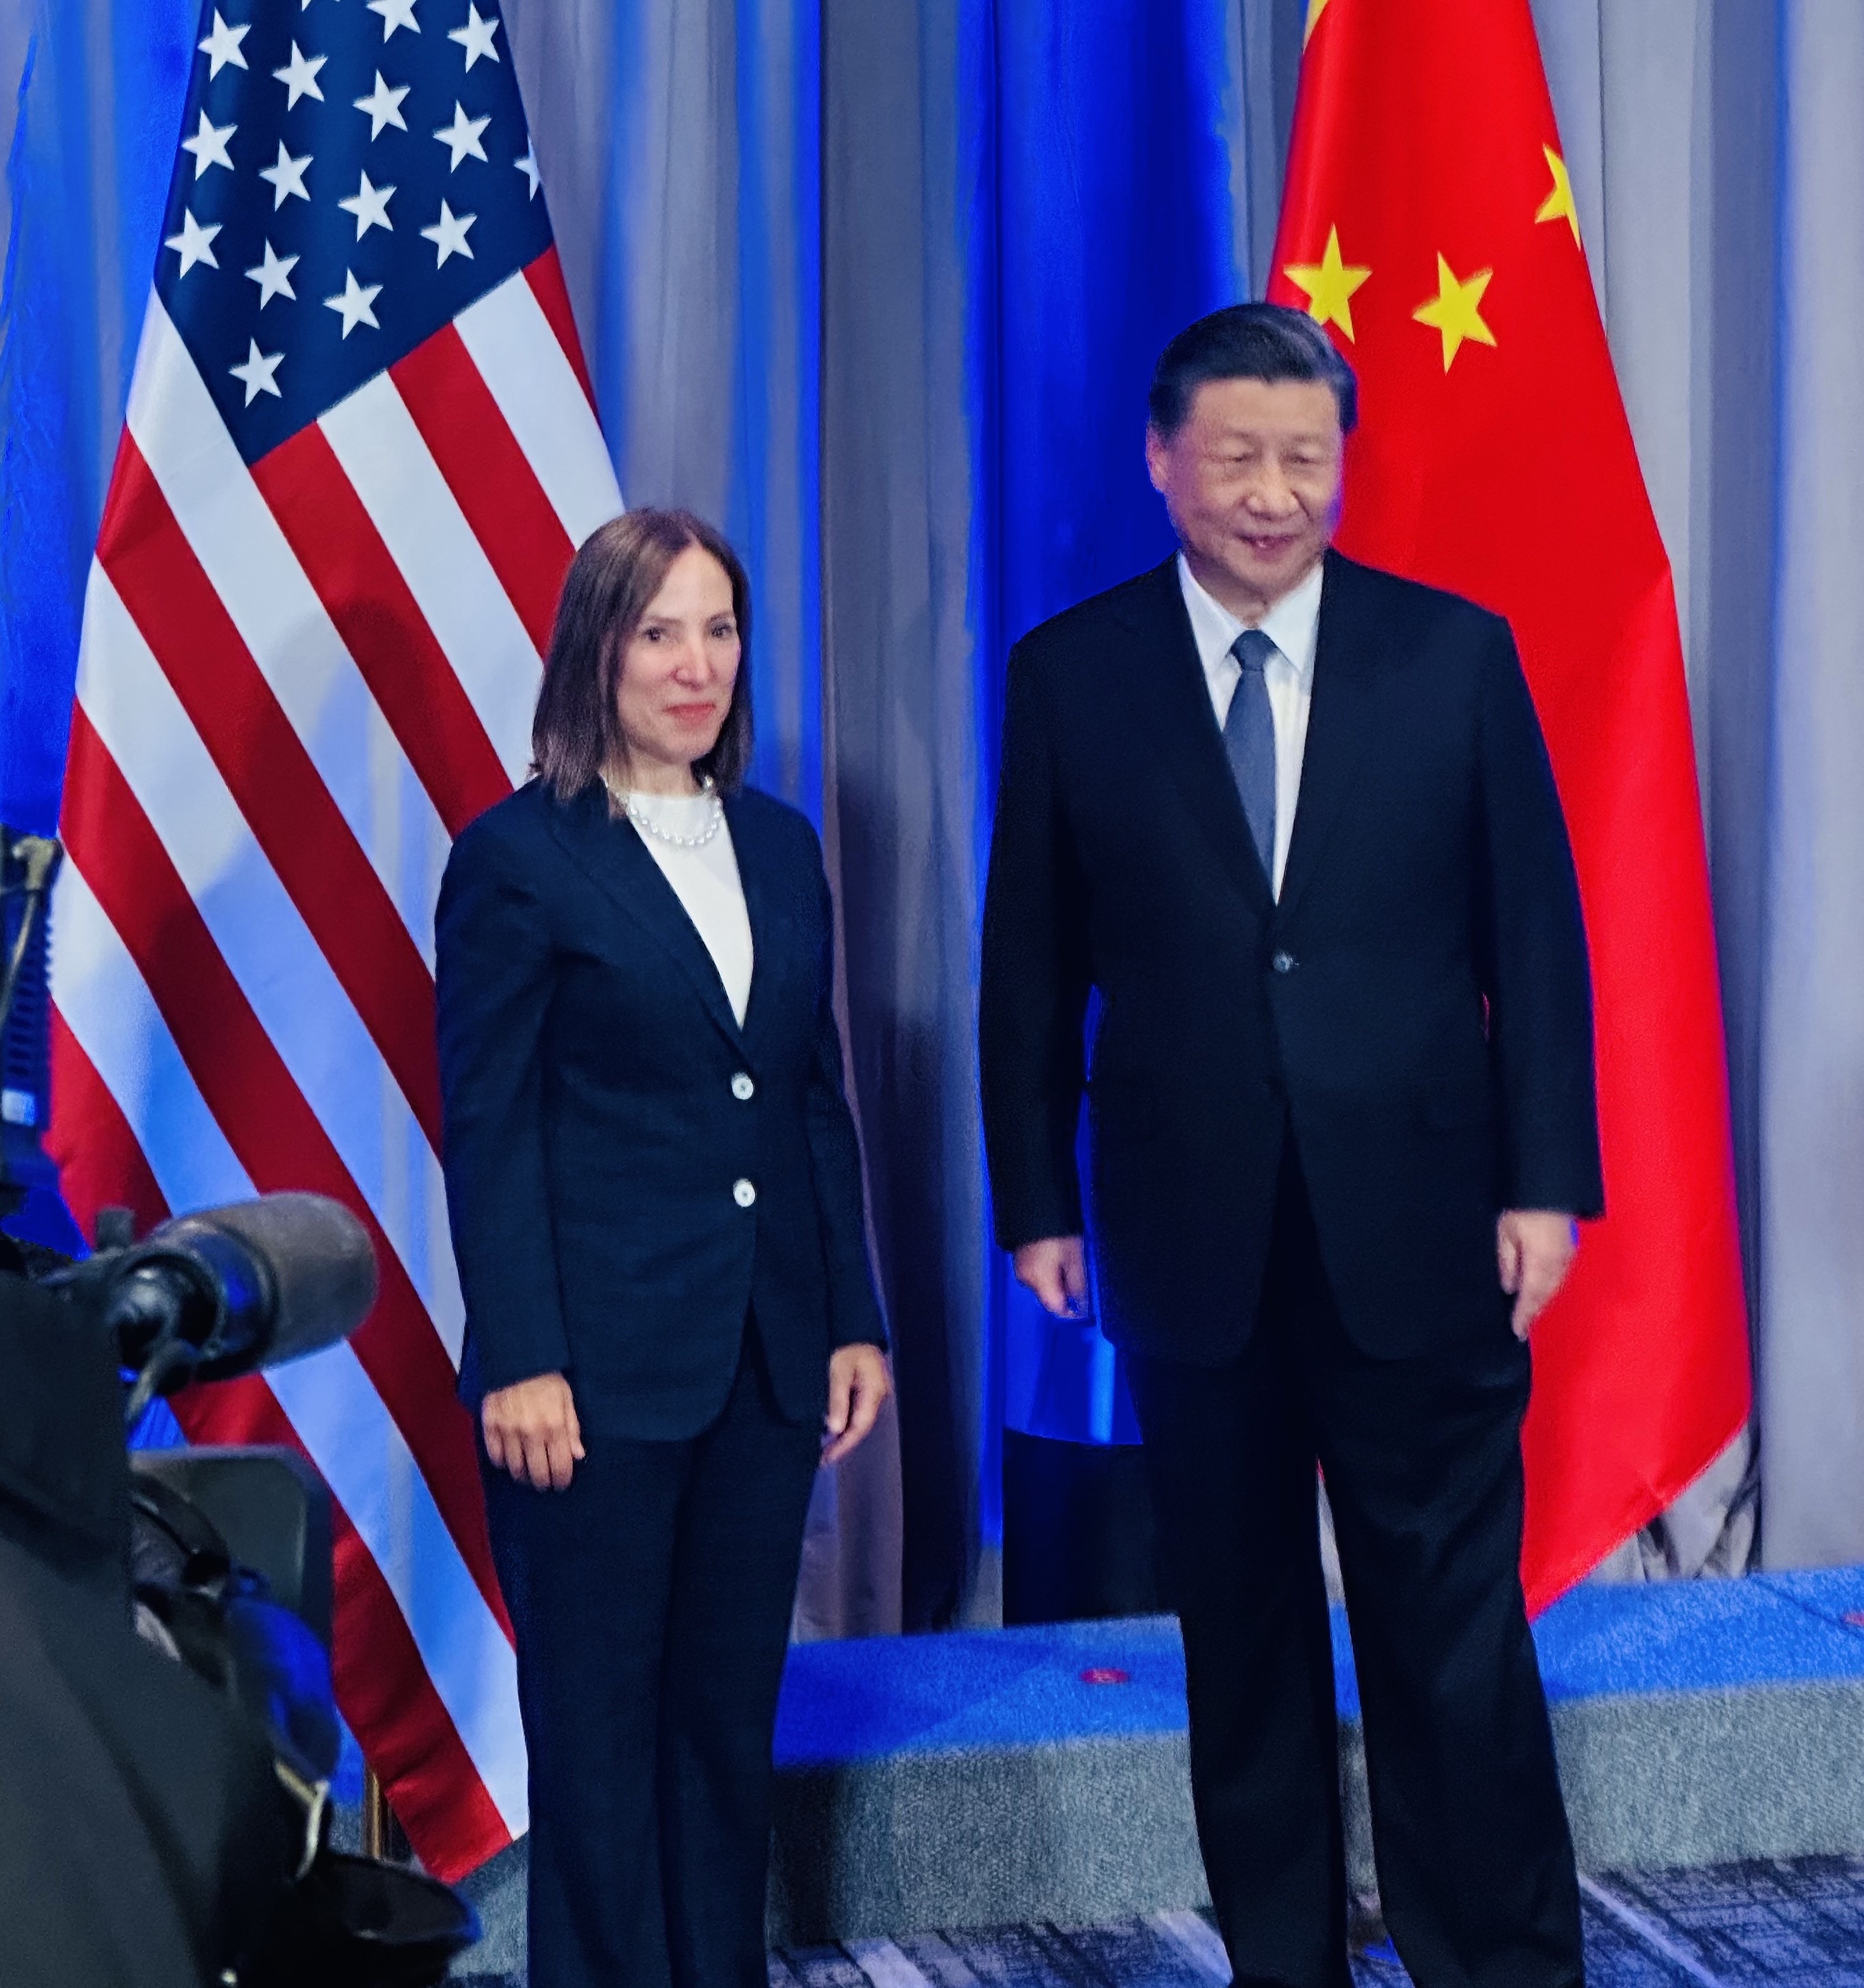 Image of Lieutenant Governor Kounalakis at APEC conference with President Xi of China